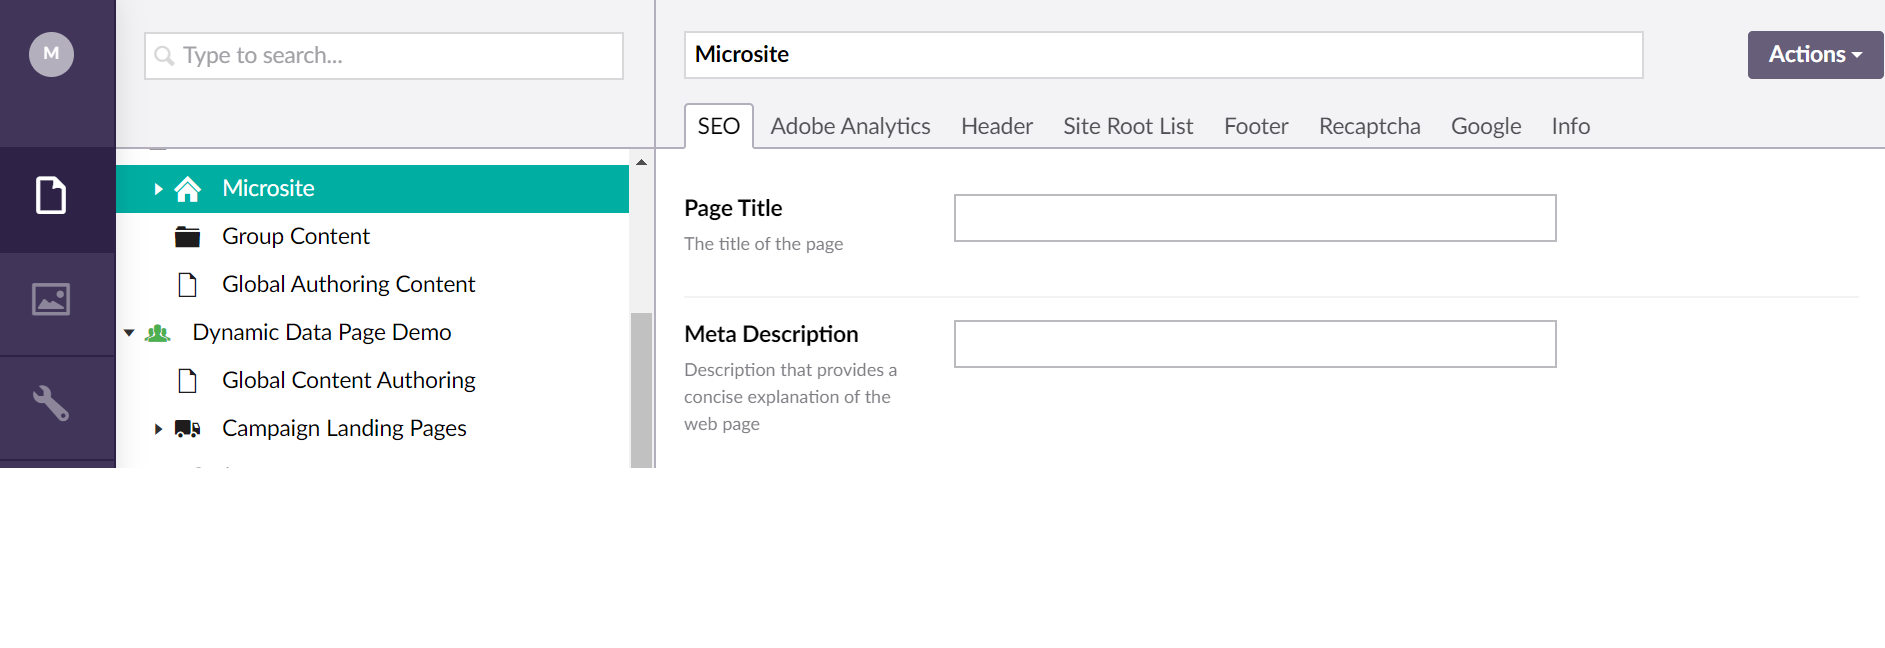 Page Title and Meta Description is Empty in Back Office